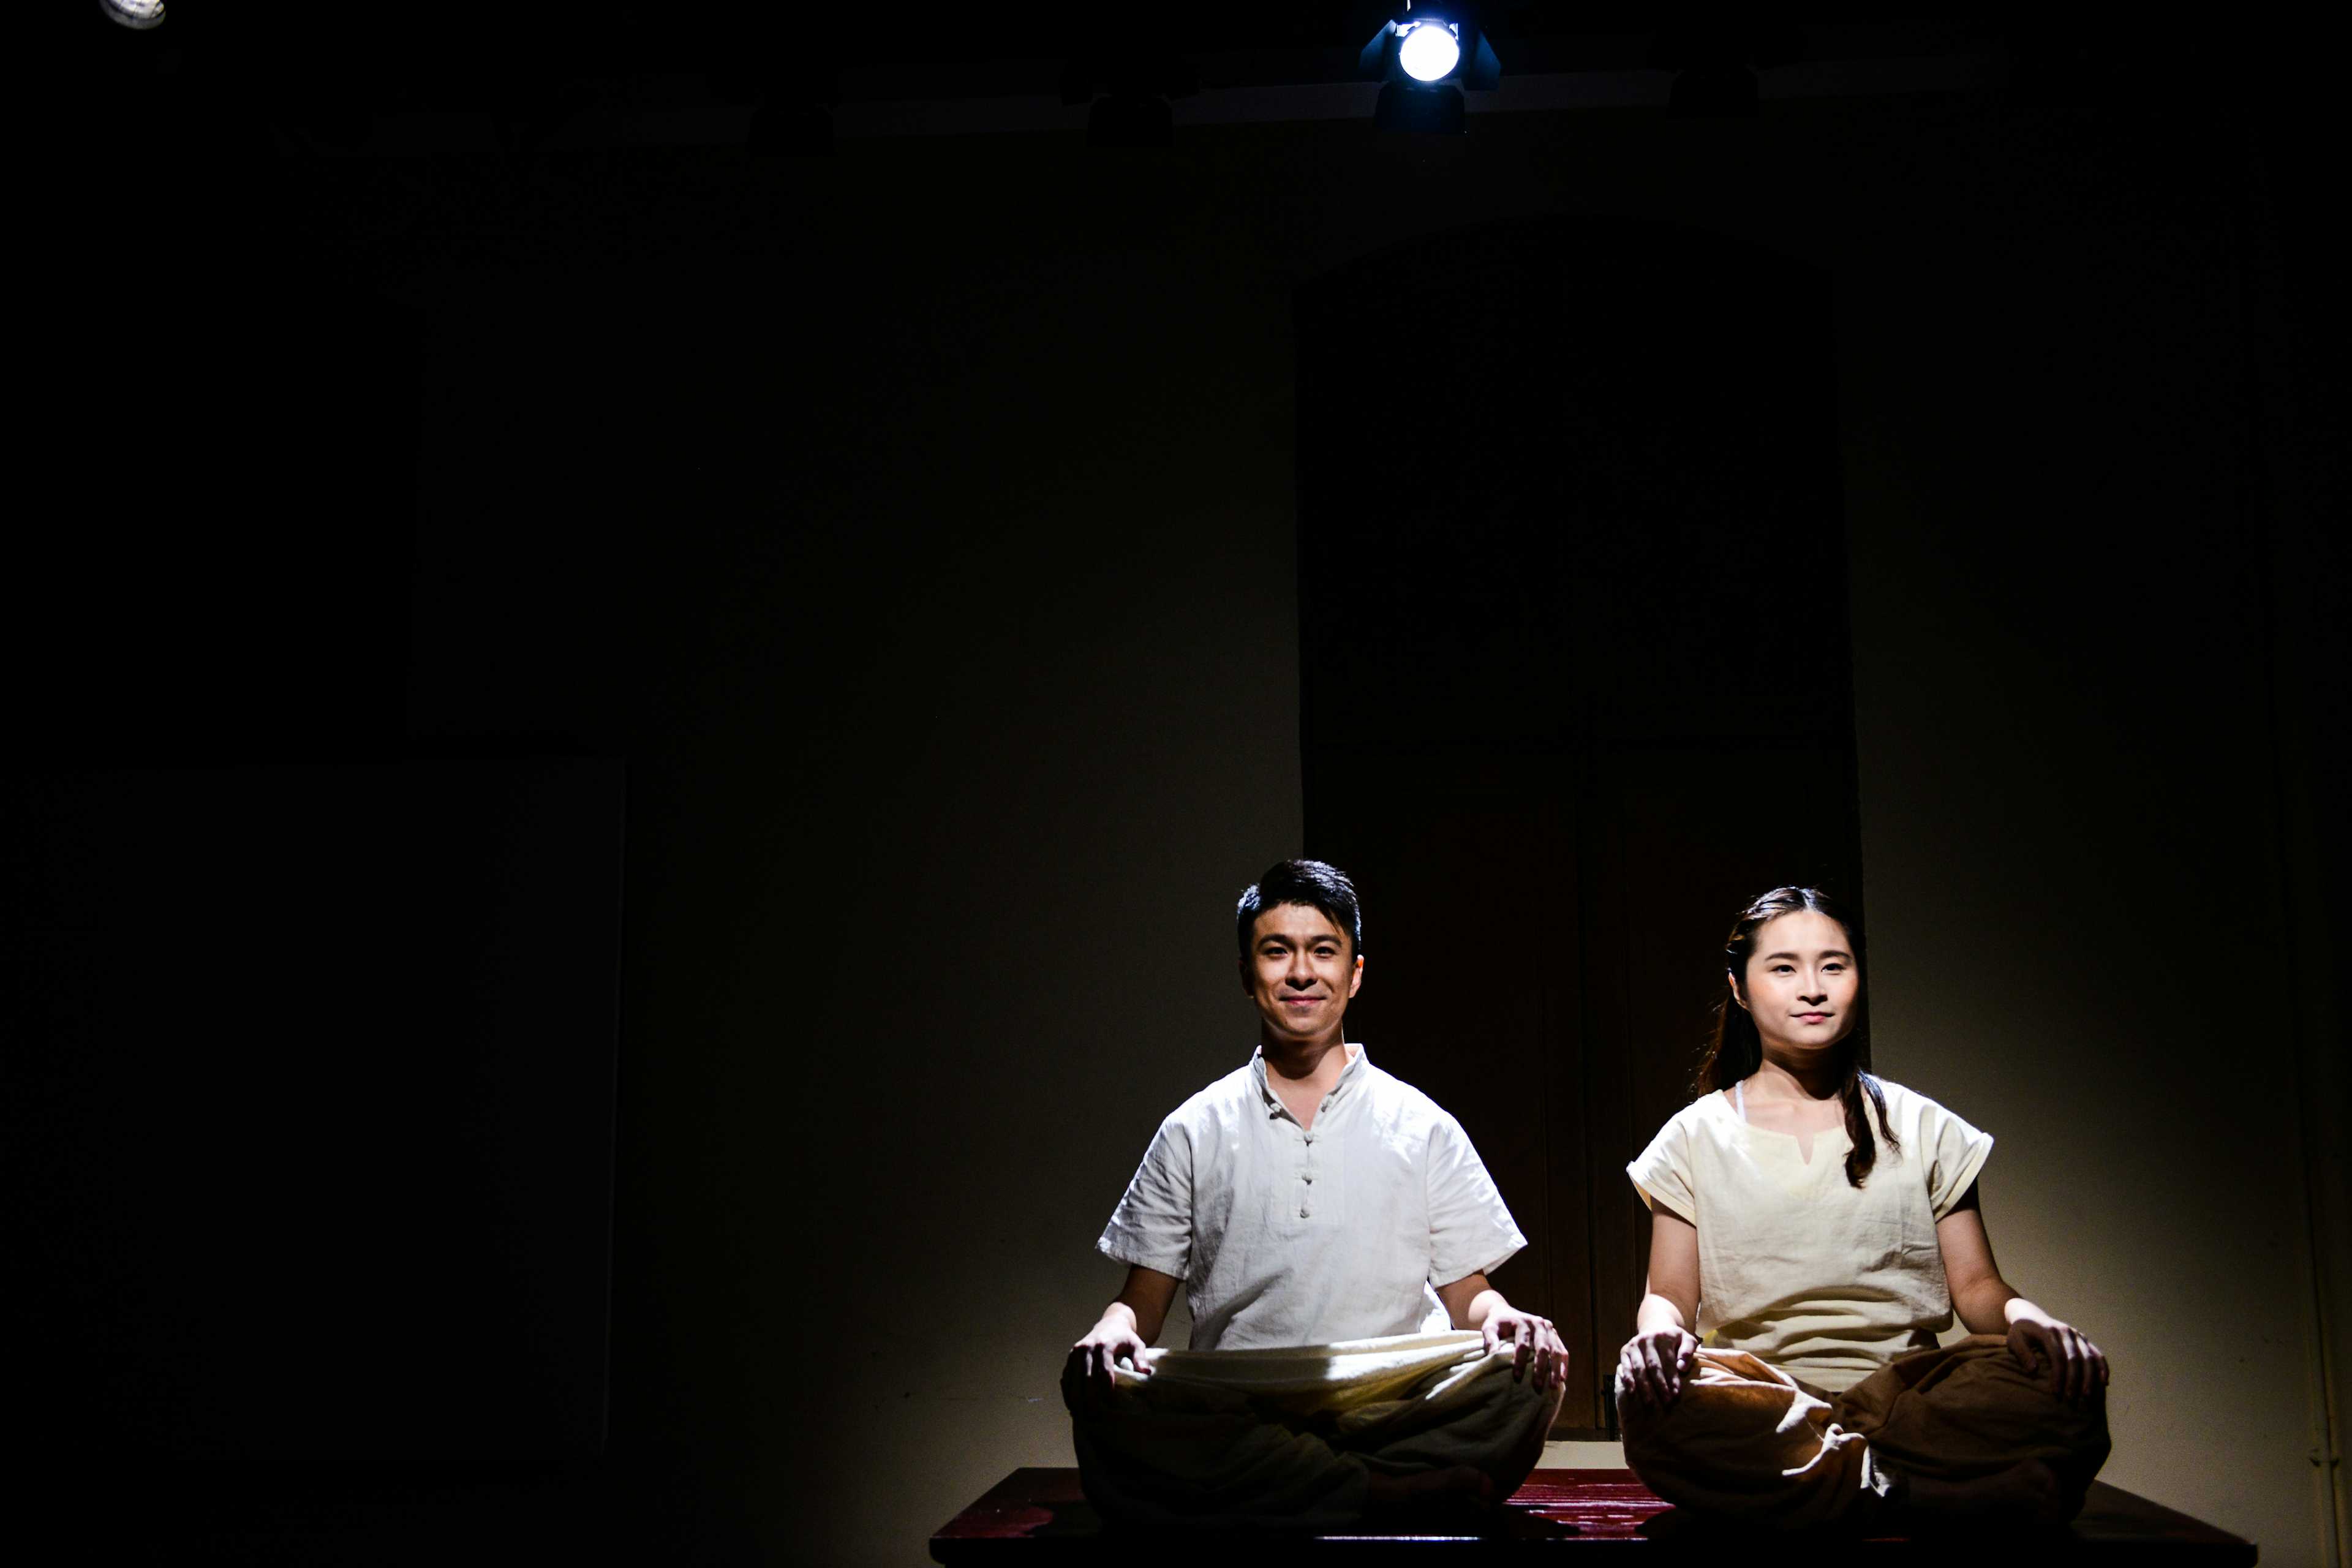 Milk and Honey | Featuring: Billy Sy, Lung Jes | Tagged as: Milk and Honey, Show | Photo: Fung Wai Sun |  (Rooftop Productions • Hong Kong Theatre Company)  | Rooftop Productions • Hong Kong Theatre Company